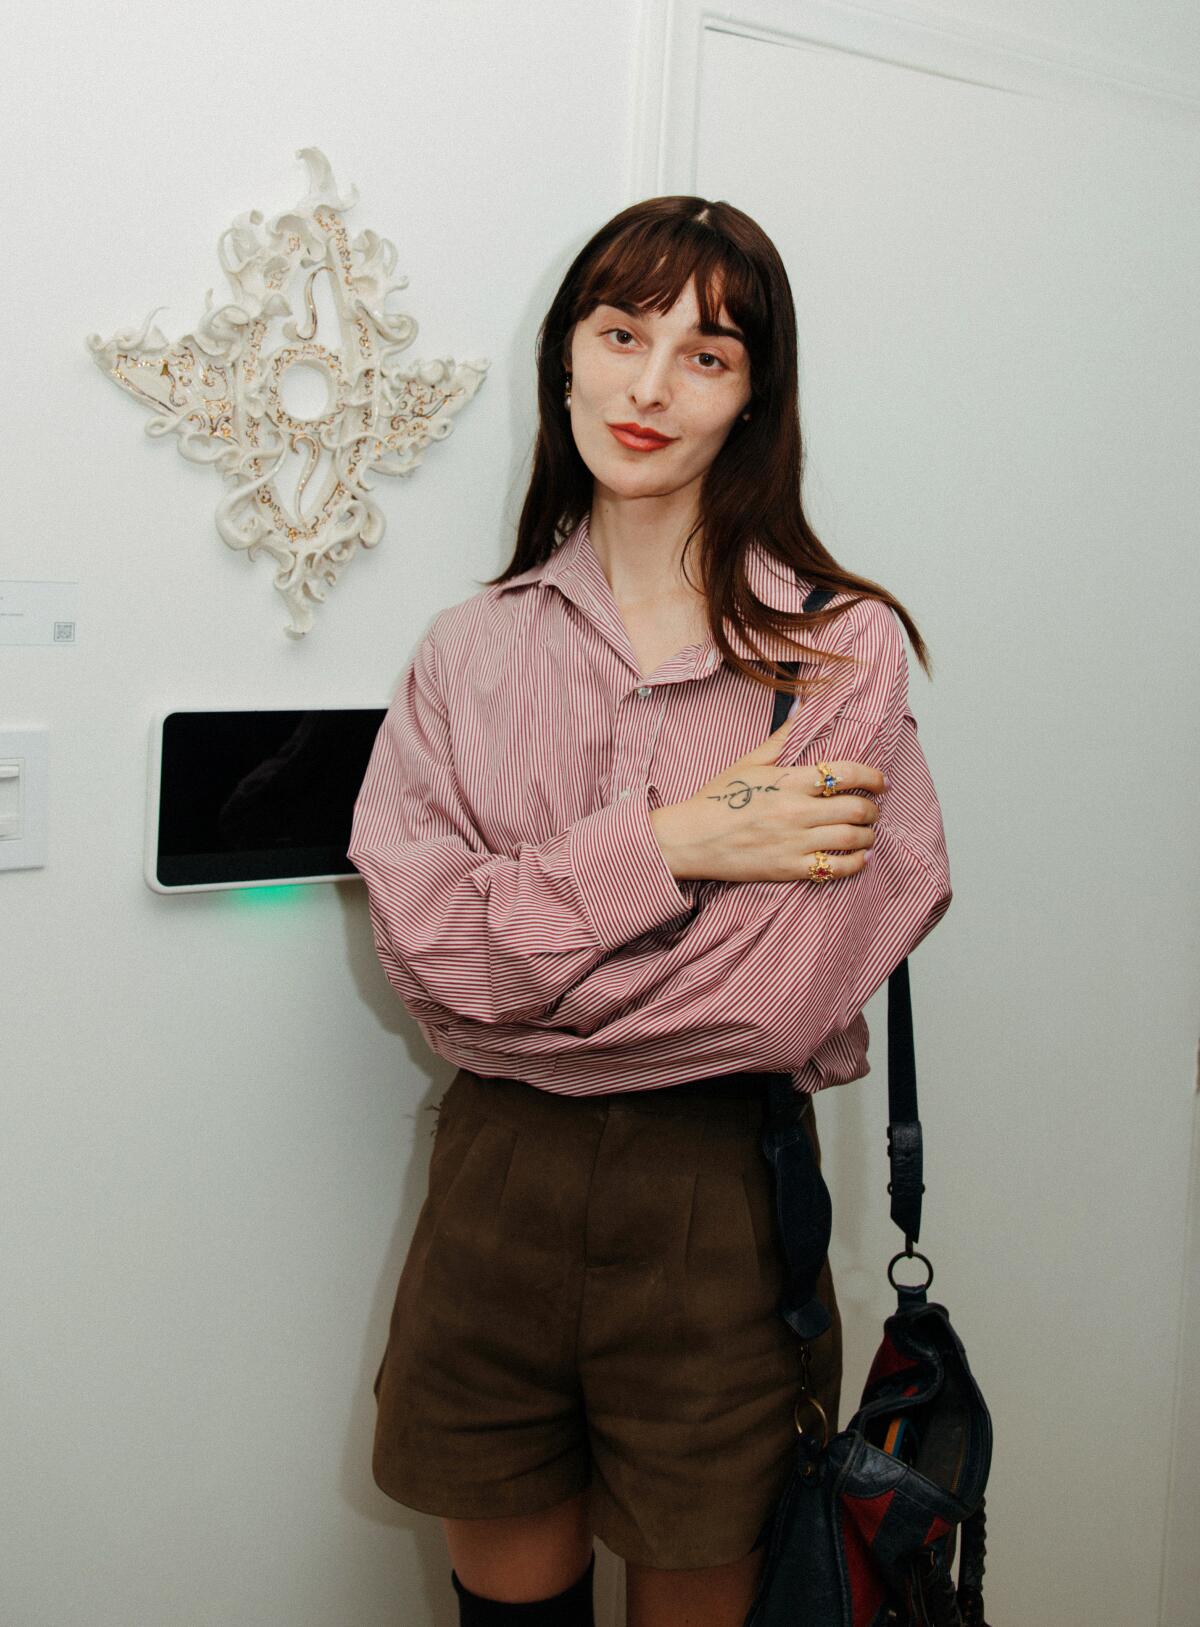 An artist with dark hair, wearing a red top and brown shorts, stands in front of her art displayed on a white wall.